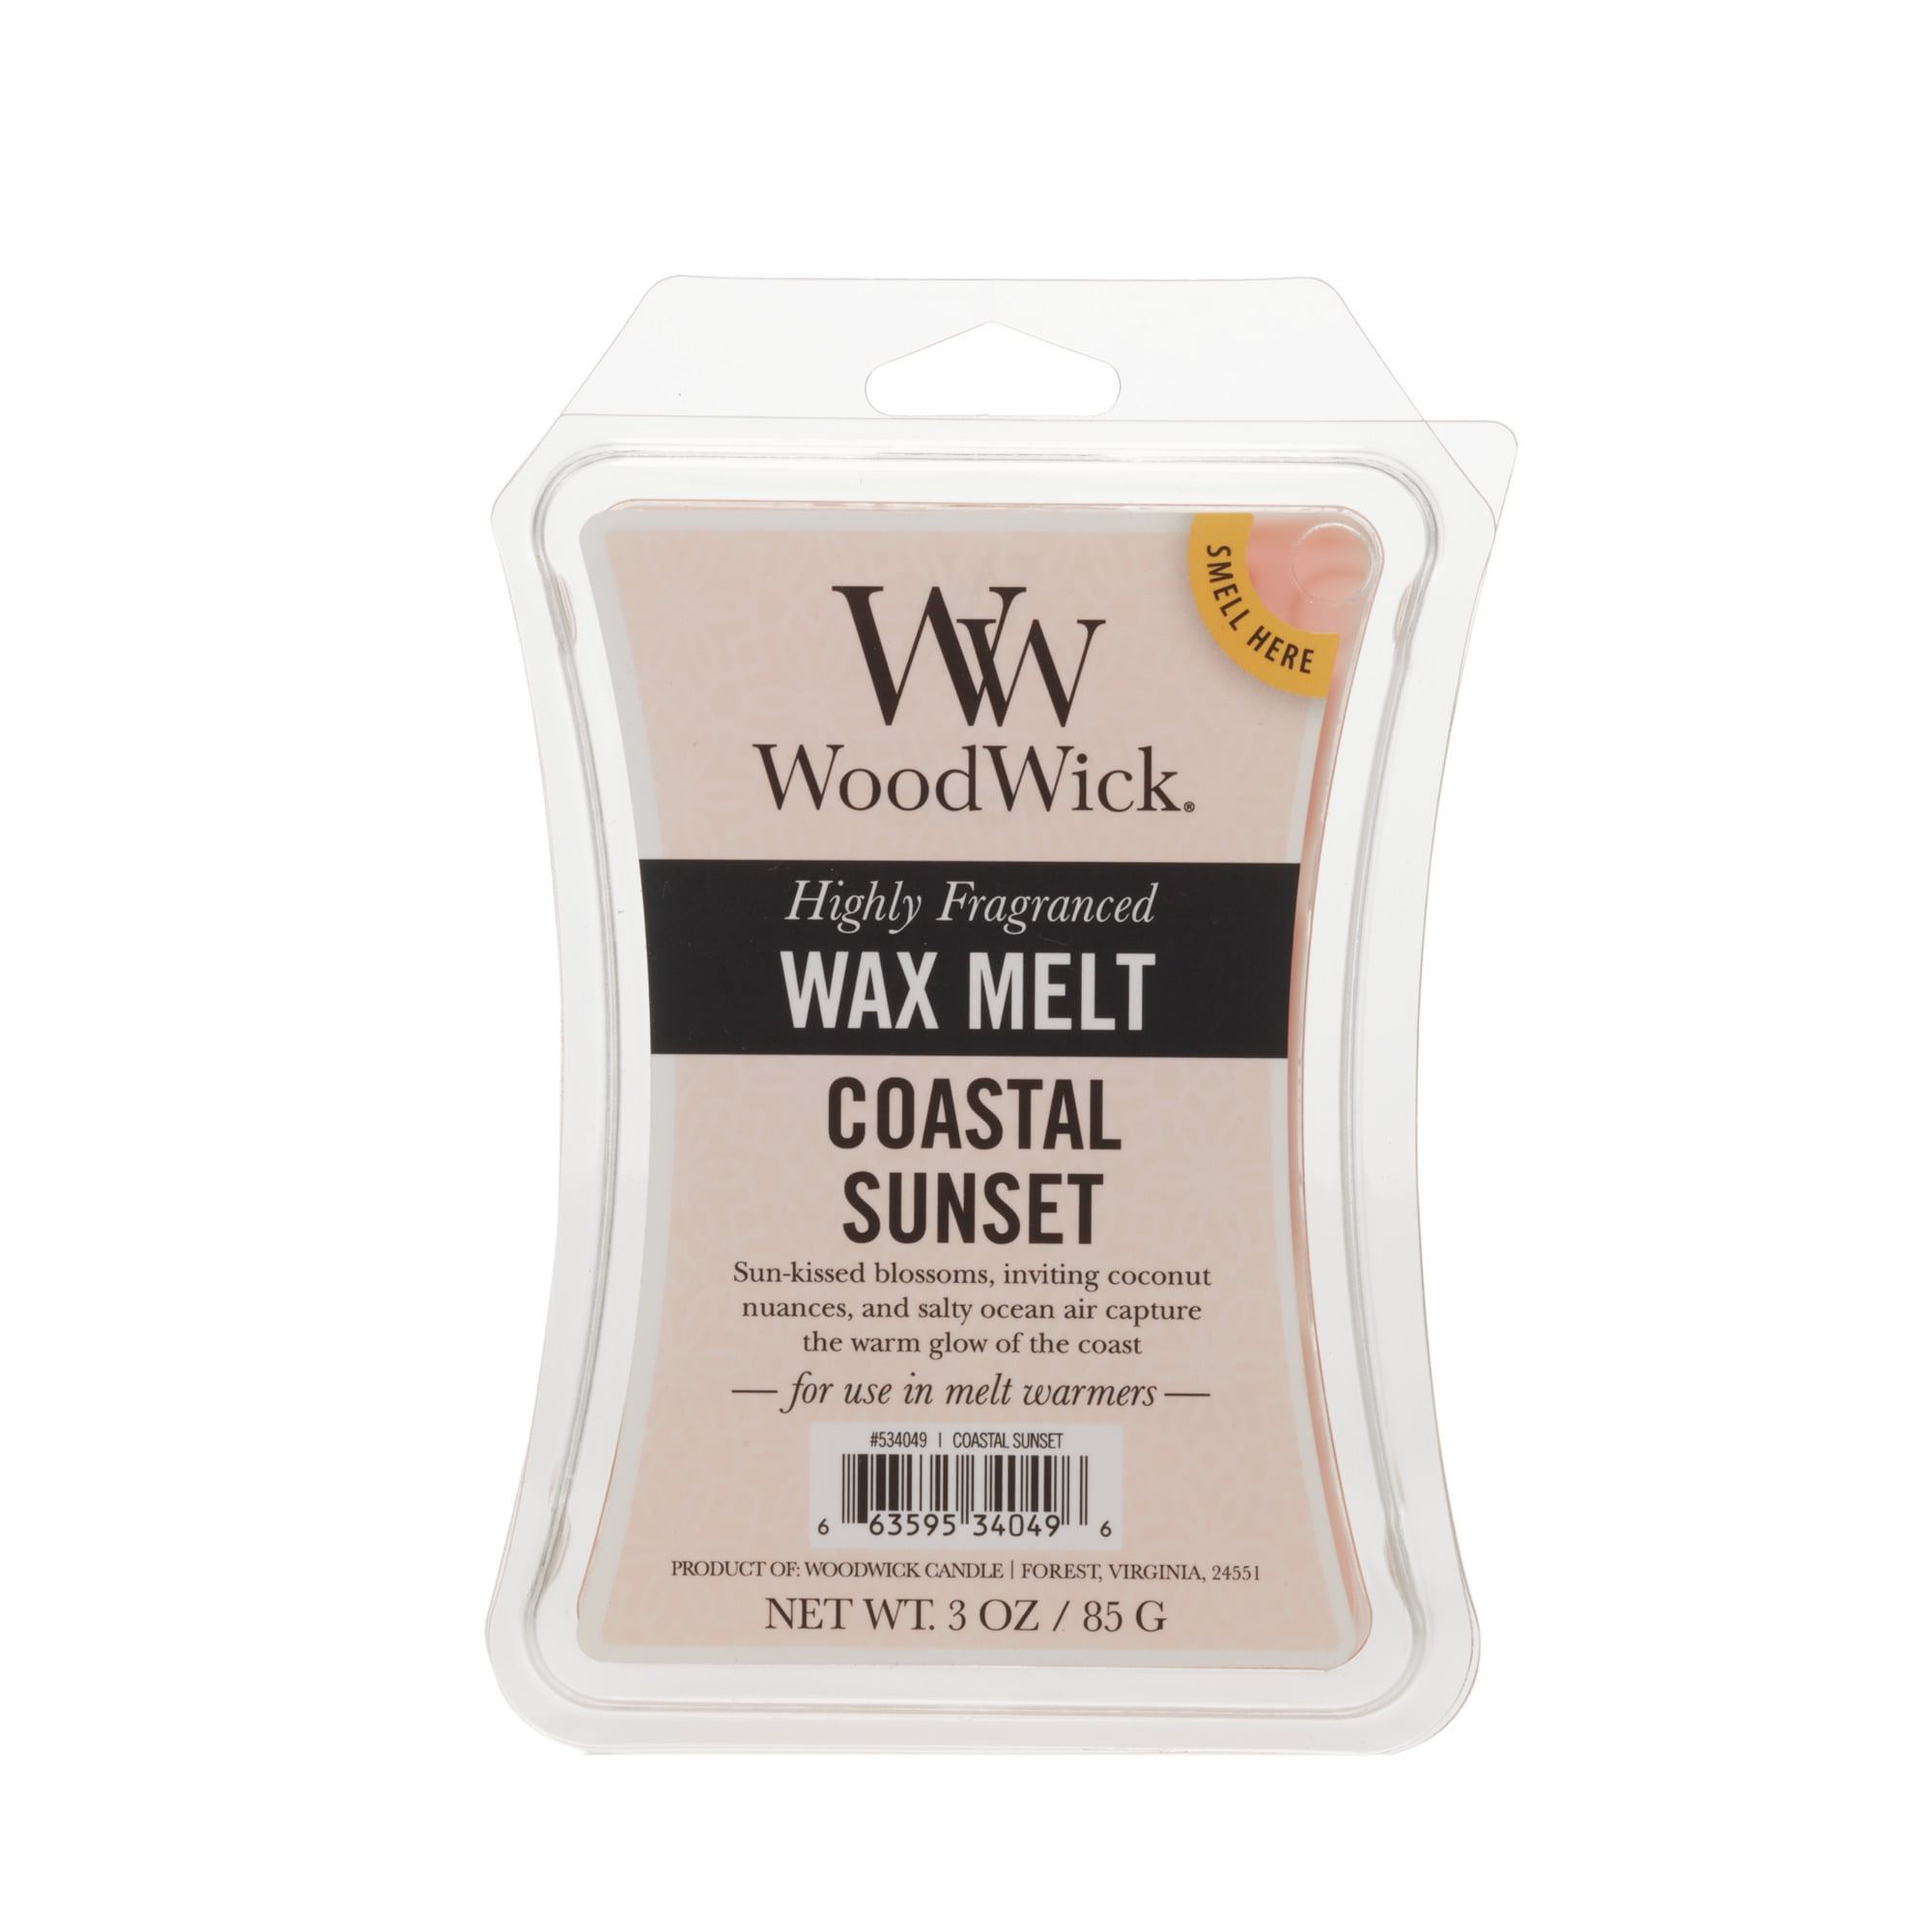 WoodWick Wax Melts 3 oz For Scentsy Warmer Choose Your Fragrance Free Shipping! 